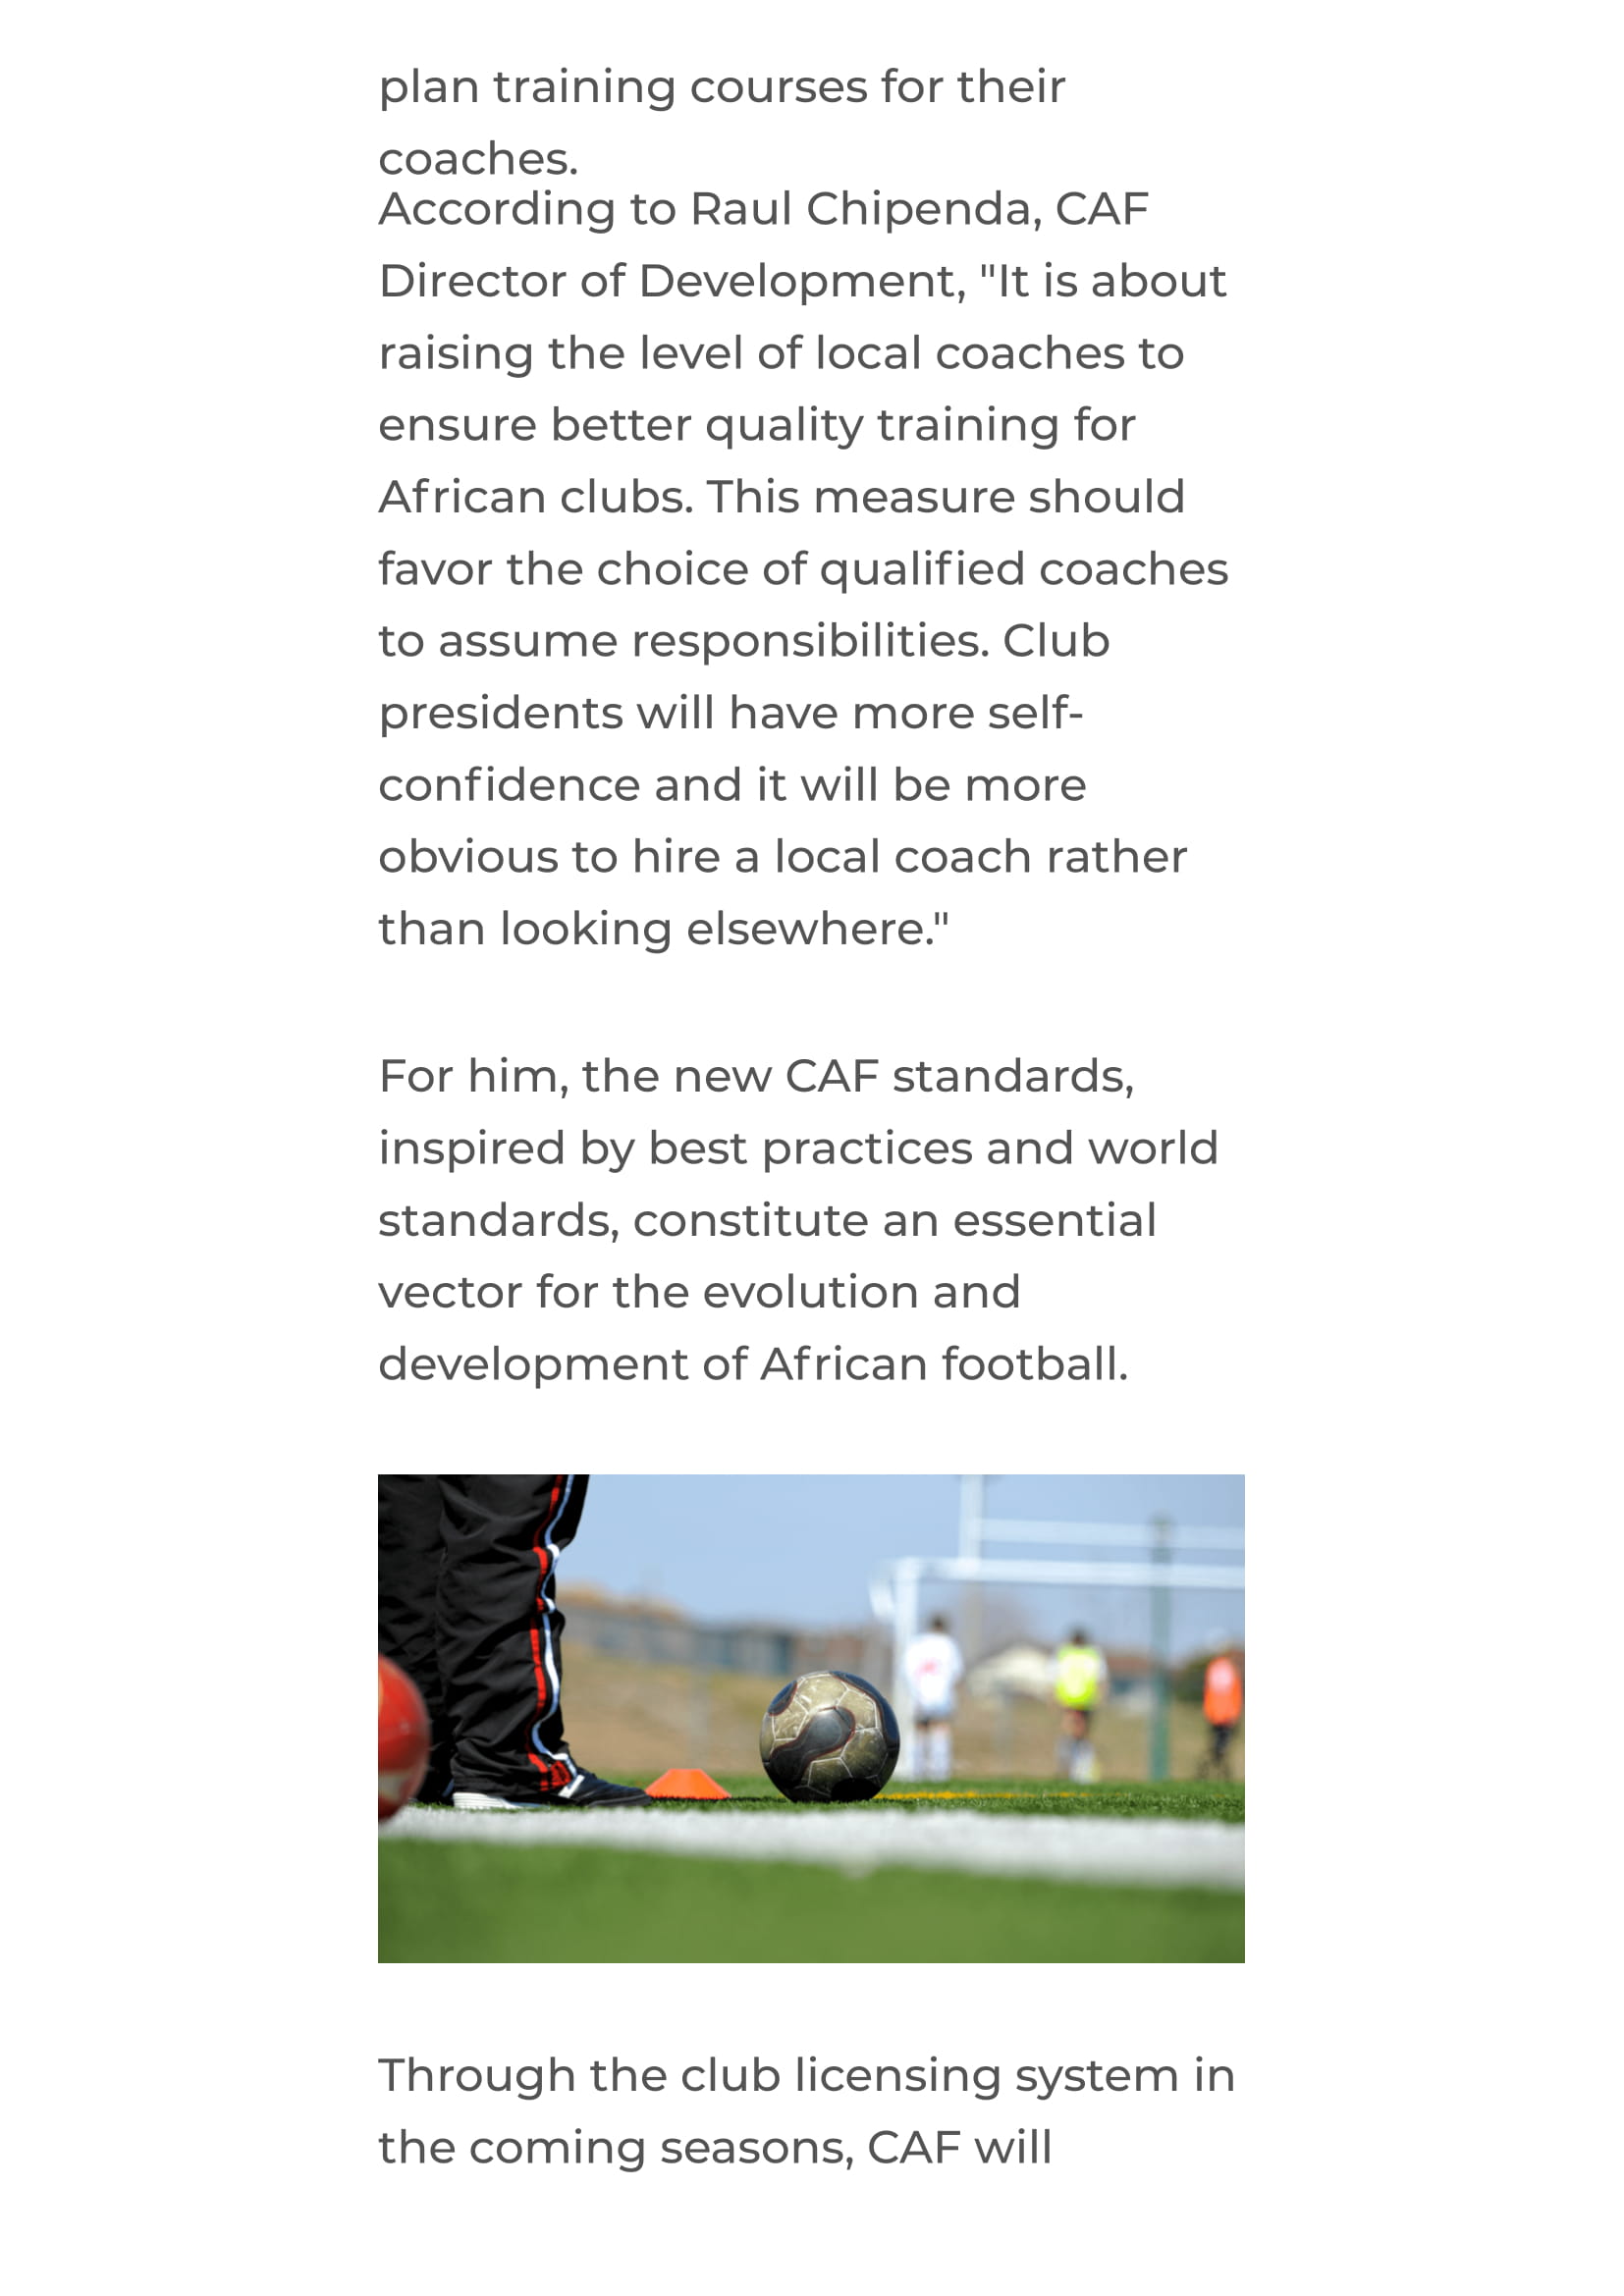 CAF COACHING LICENSE: WHY WERE 21 COACHES SIDELINED?